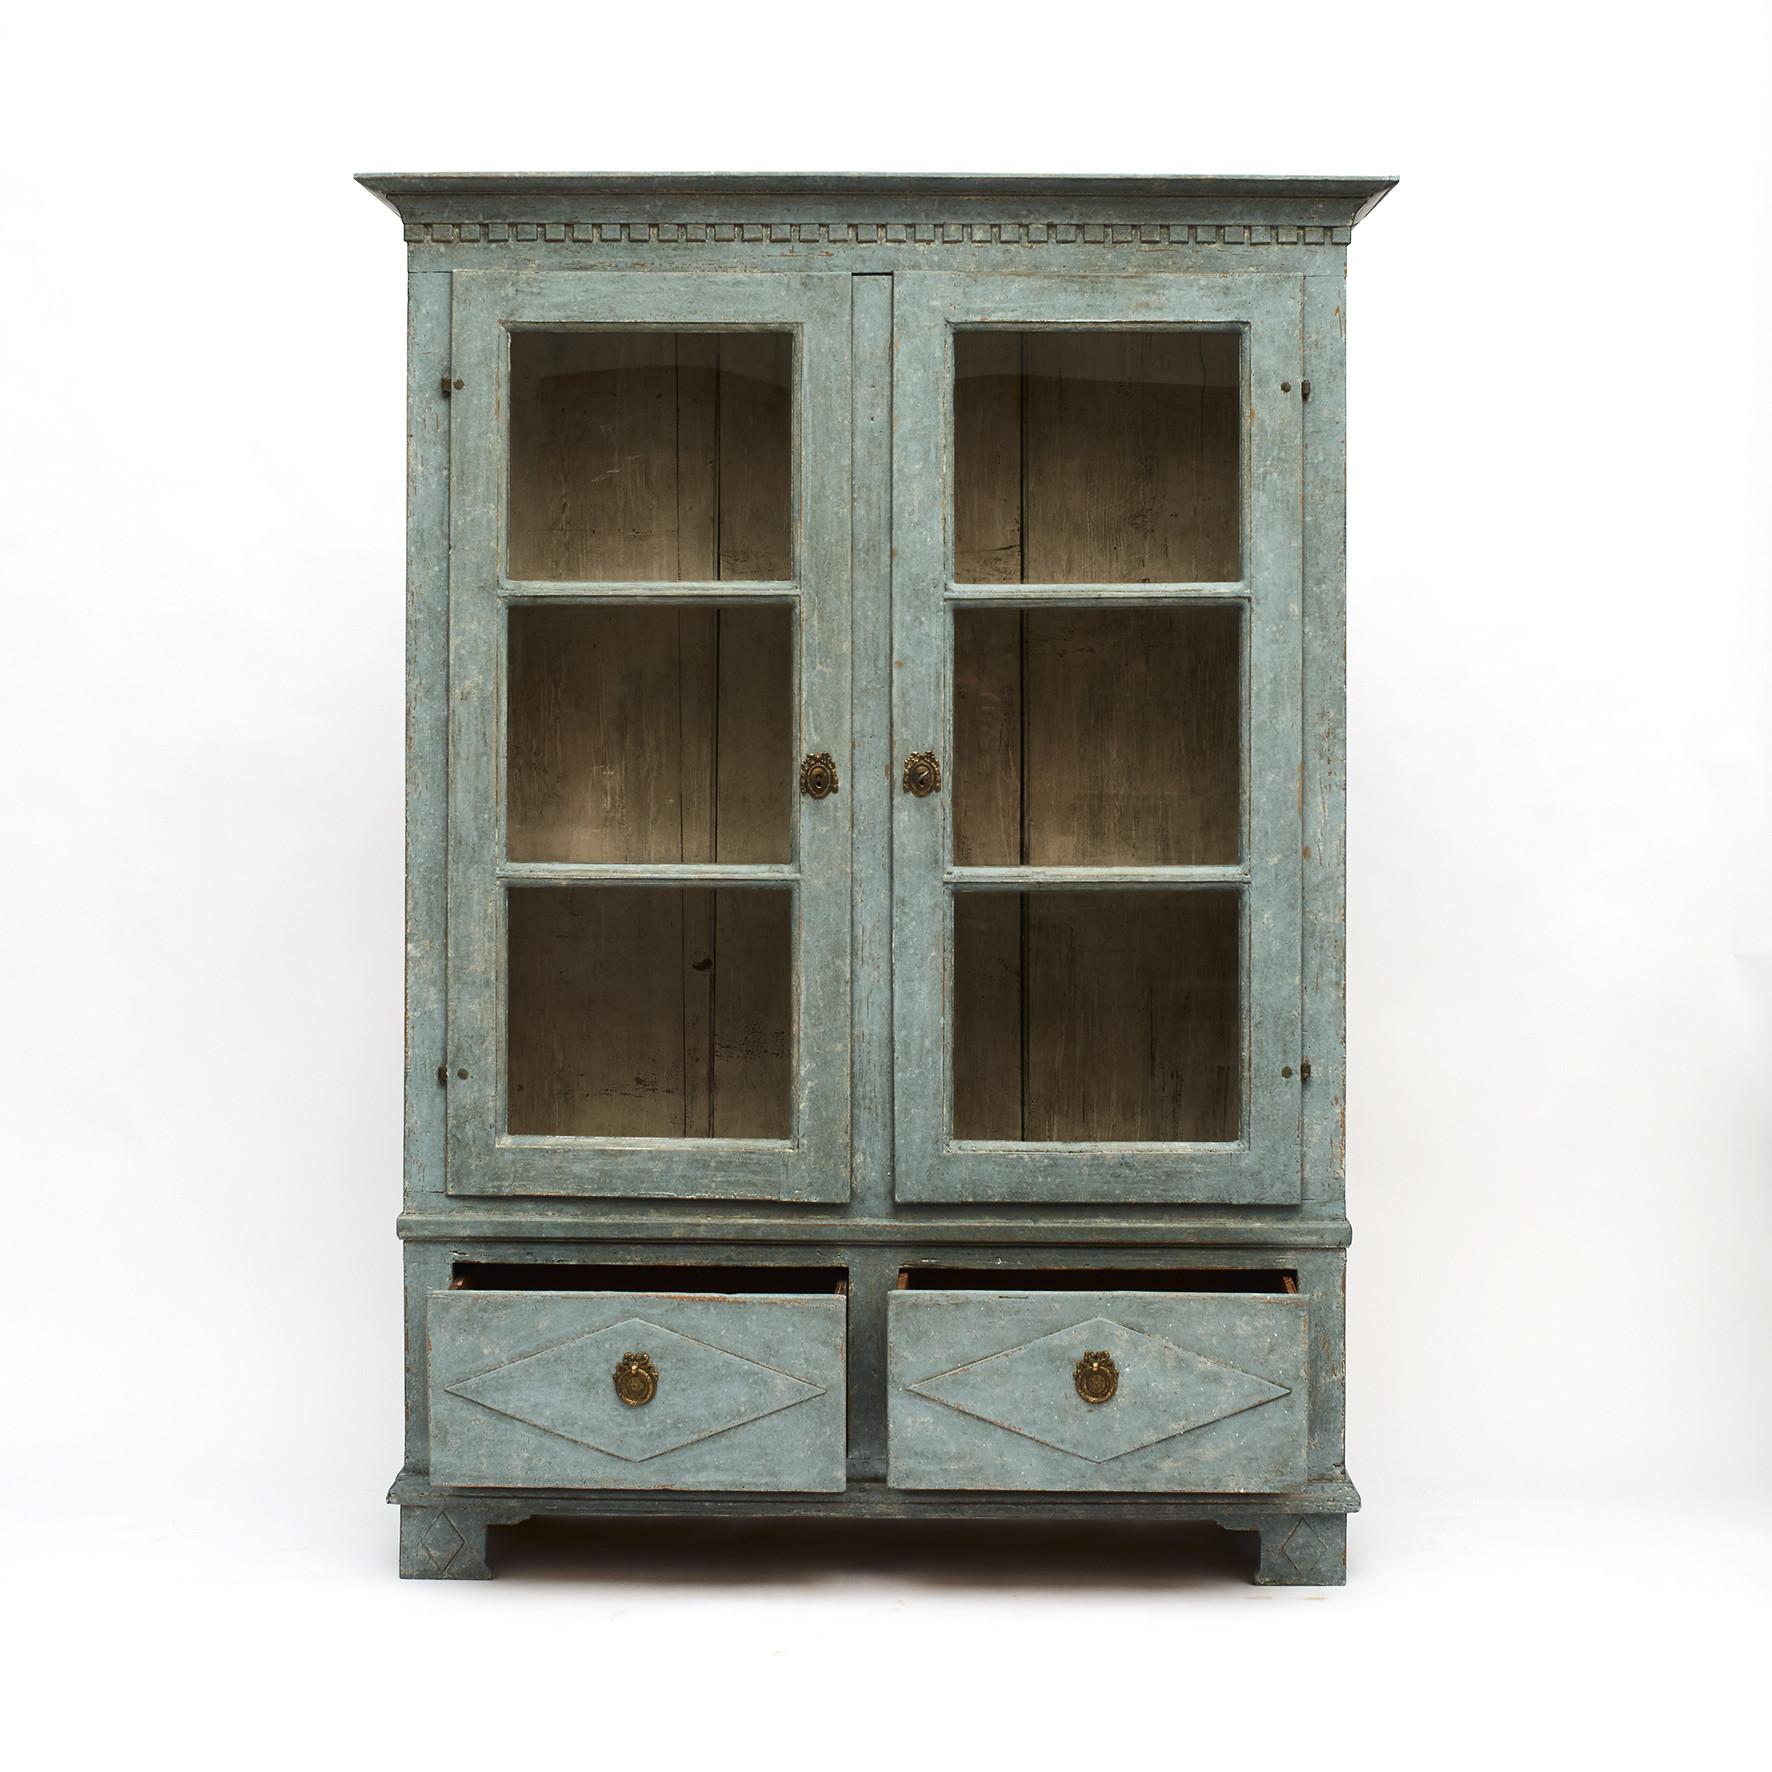 Swedish Gustavian style vitrine/display cabinet.
Pair of paned glass doors, the inside with upright partition in the middle dividing the cabinet into two interior sections of storage, with shelves on each side.
Cornice featuring carved dentil